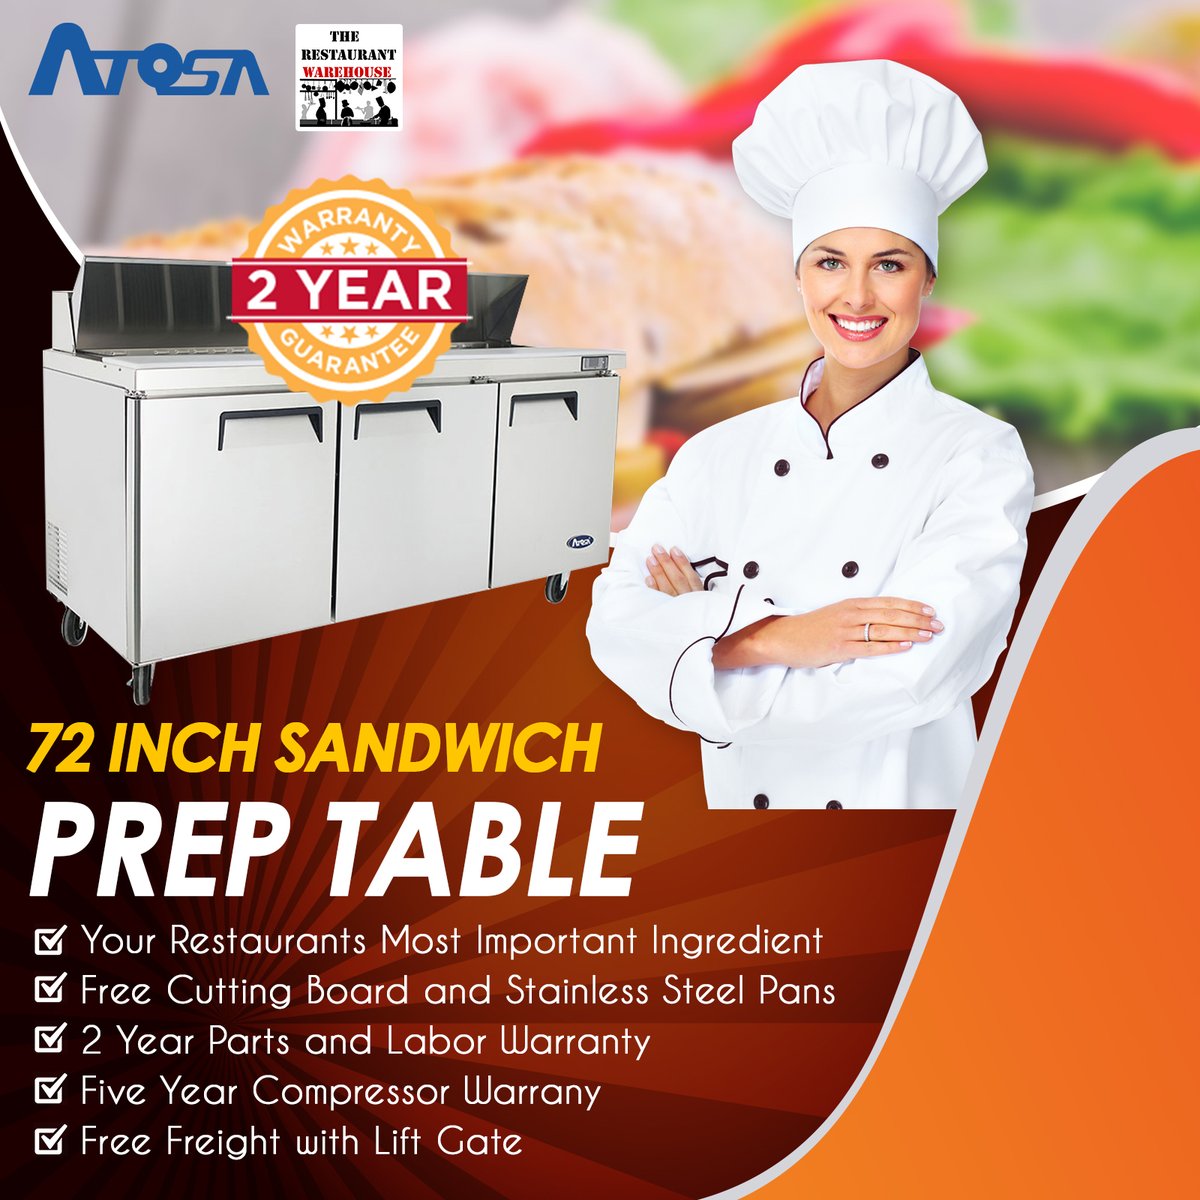 🥪👨‍🍳 If you're serious about making the perfect sandwich, you need the perfect prep table. Our sandwich prep table is the missing ingredient you need to take your sandwich game to the next level. Try it out today! 🙌 #sandwichprep #kitchenessentials 🍴 

therestaurantwarehouse.com/collections/sa…